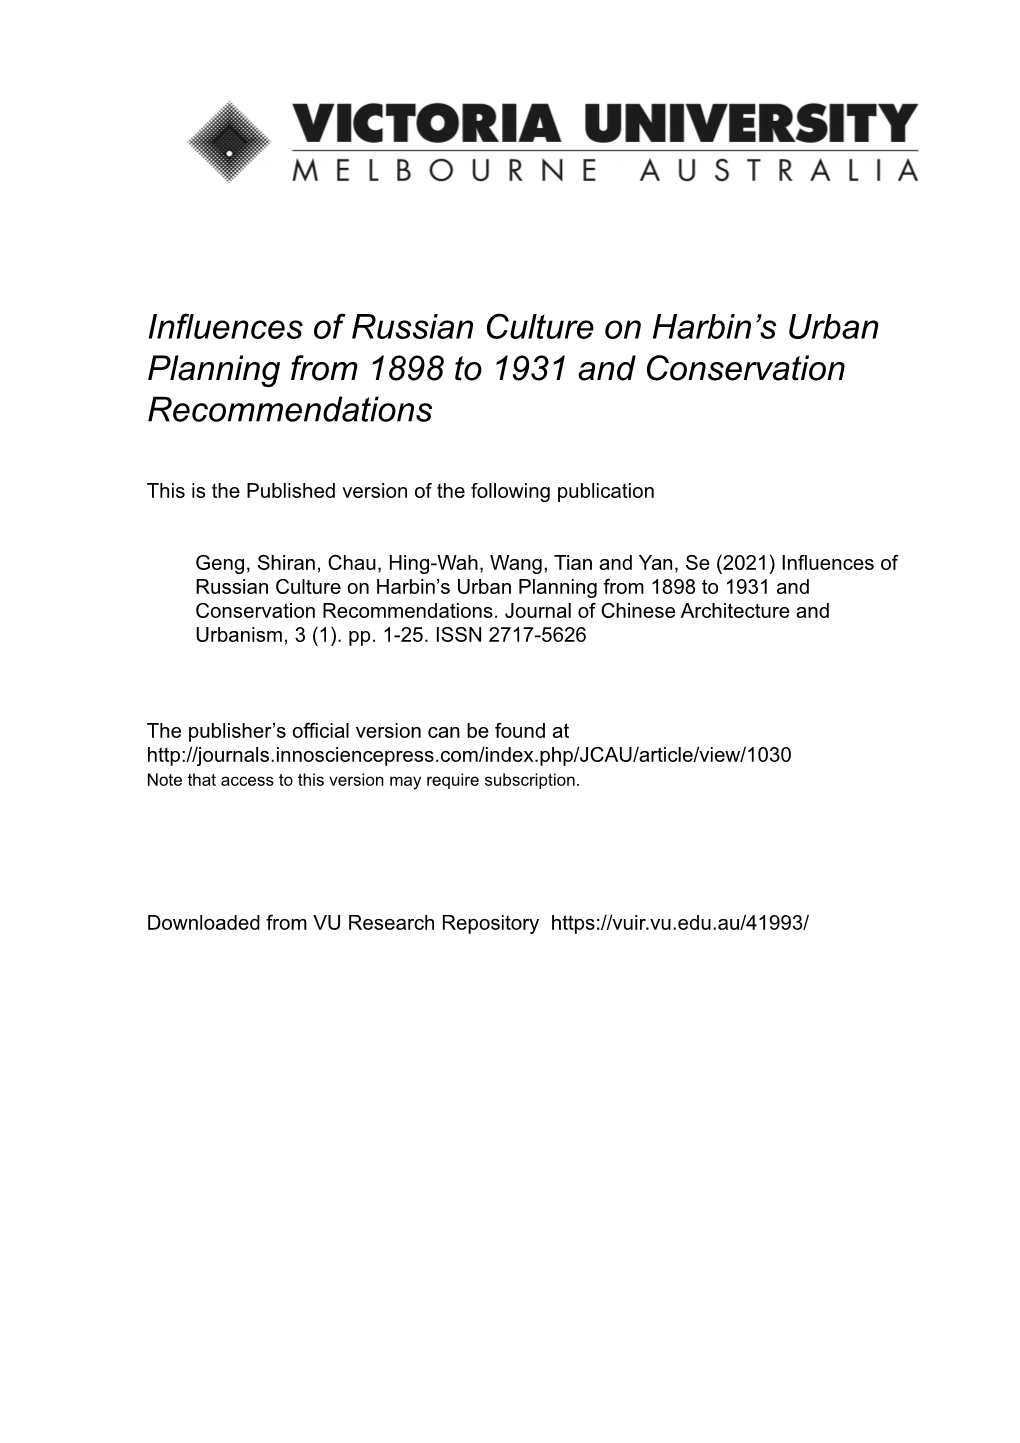 Influences of Russian Culture on Harbin's Urban Planning from 1898